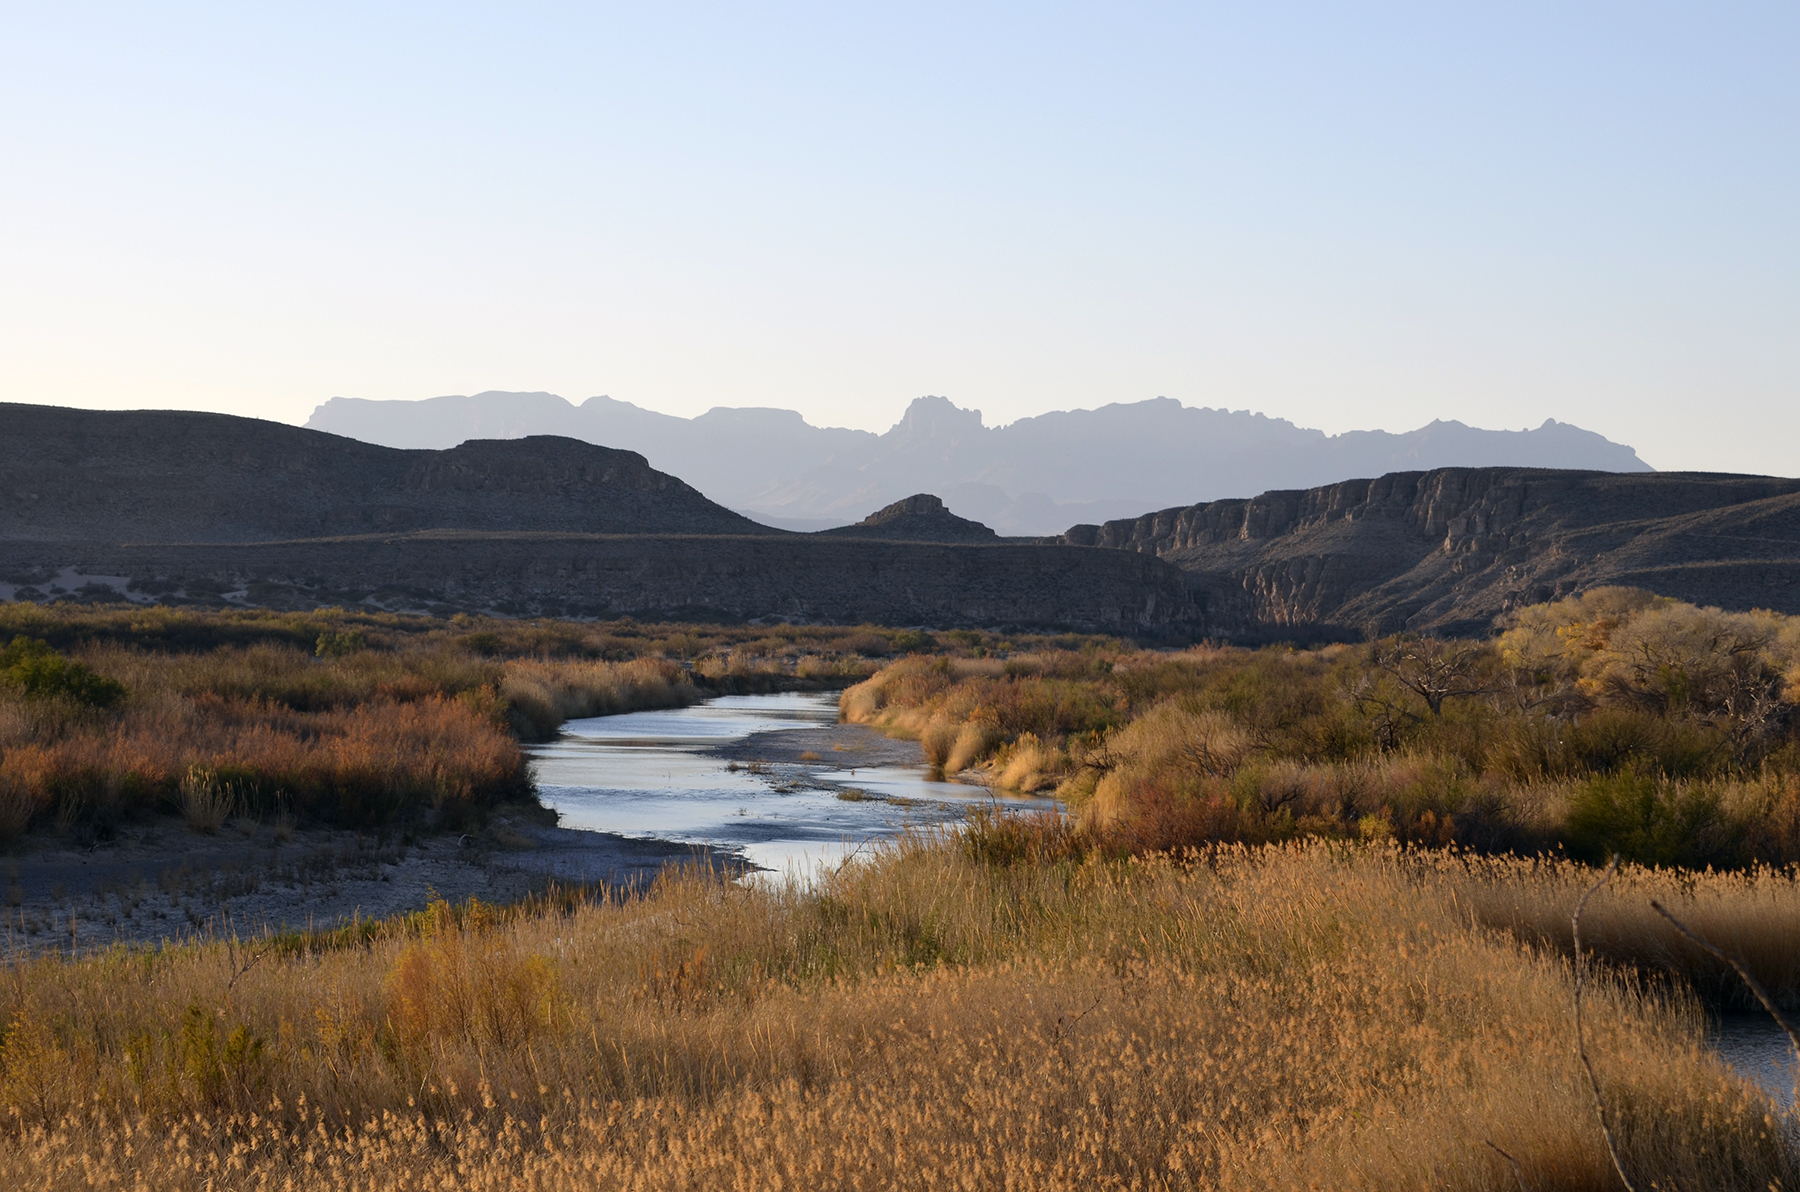 A desert river with a backdrop of mountains in the distance.